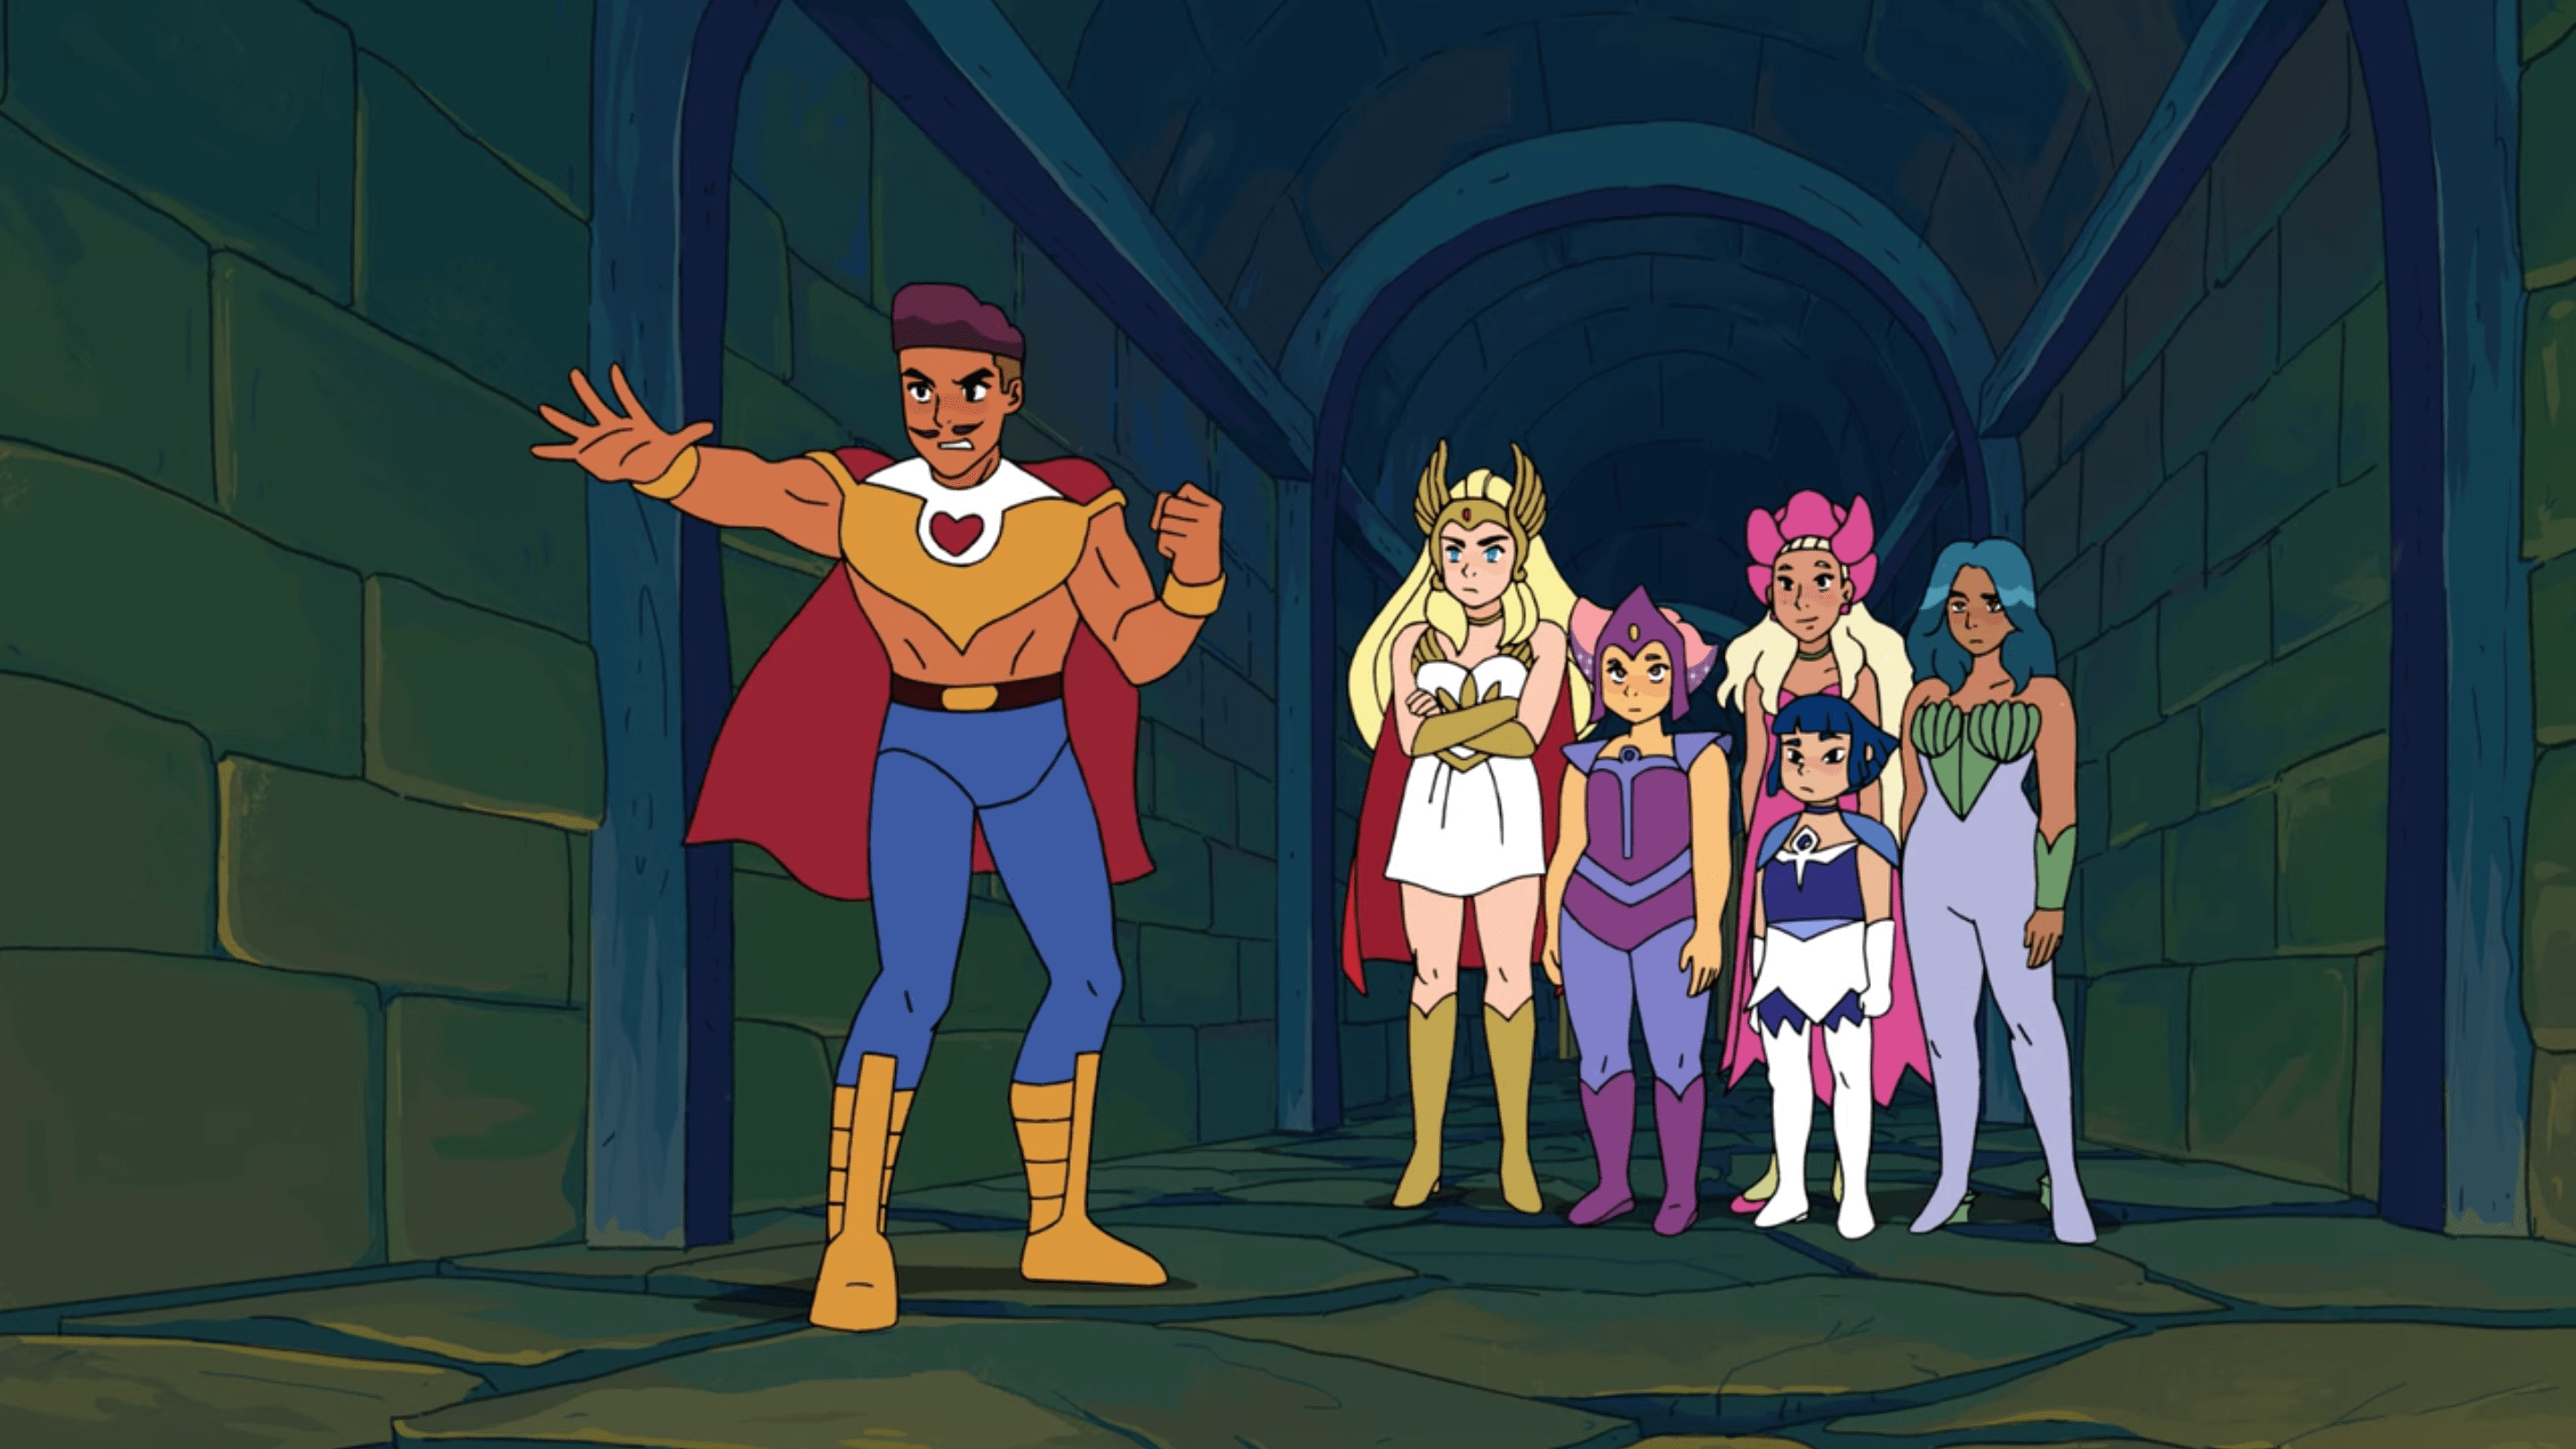 20 of the Best She-Ra and the Princesses of Power Lewks